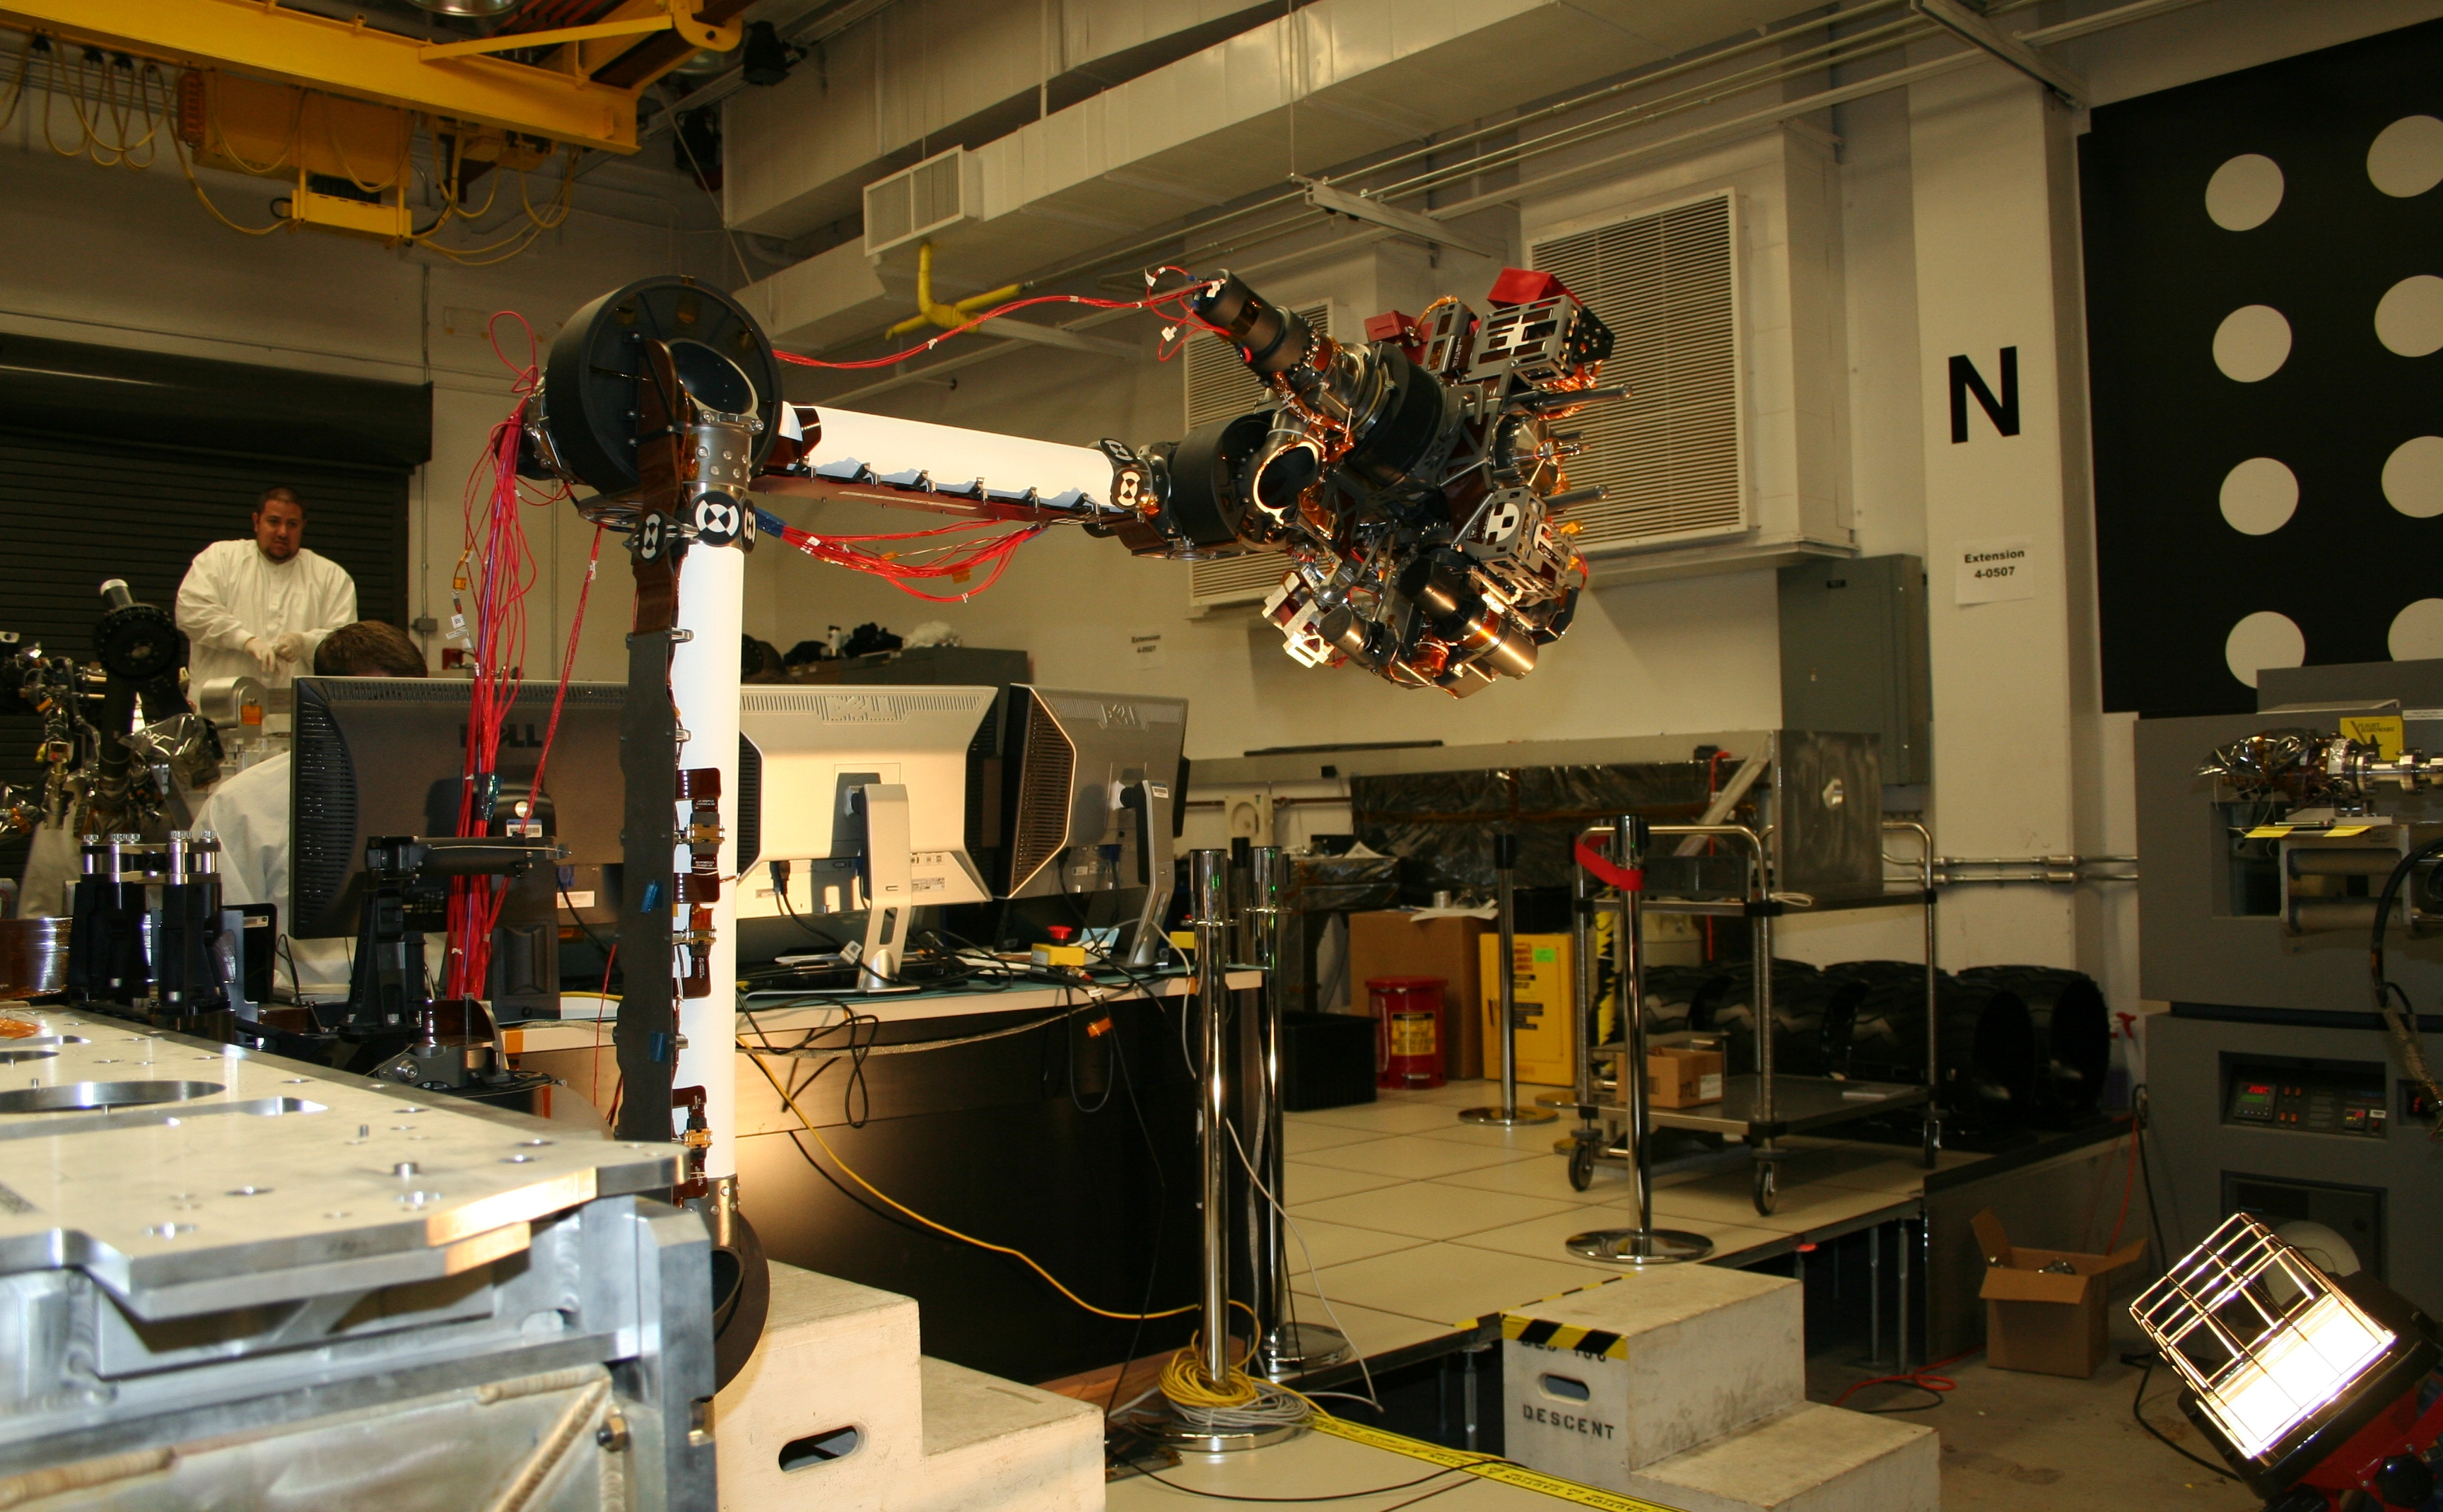 In the middle of this picture, the robotic arm is bent at nearly a 90-degree angle, with the instruments on the end of the arm reaching to the right.  Behind the arm is the laboratory where it is being tested. One engineer is hidden behind a bank of computers, while another with a goatee stands watching in the back, beneath a yellow ceiling crane.  Both engineers wear white lab coats.  Metal lab equipment is scattered throughout the room.